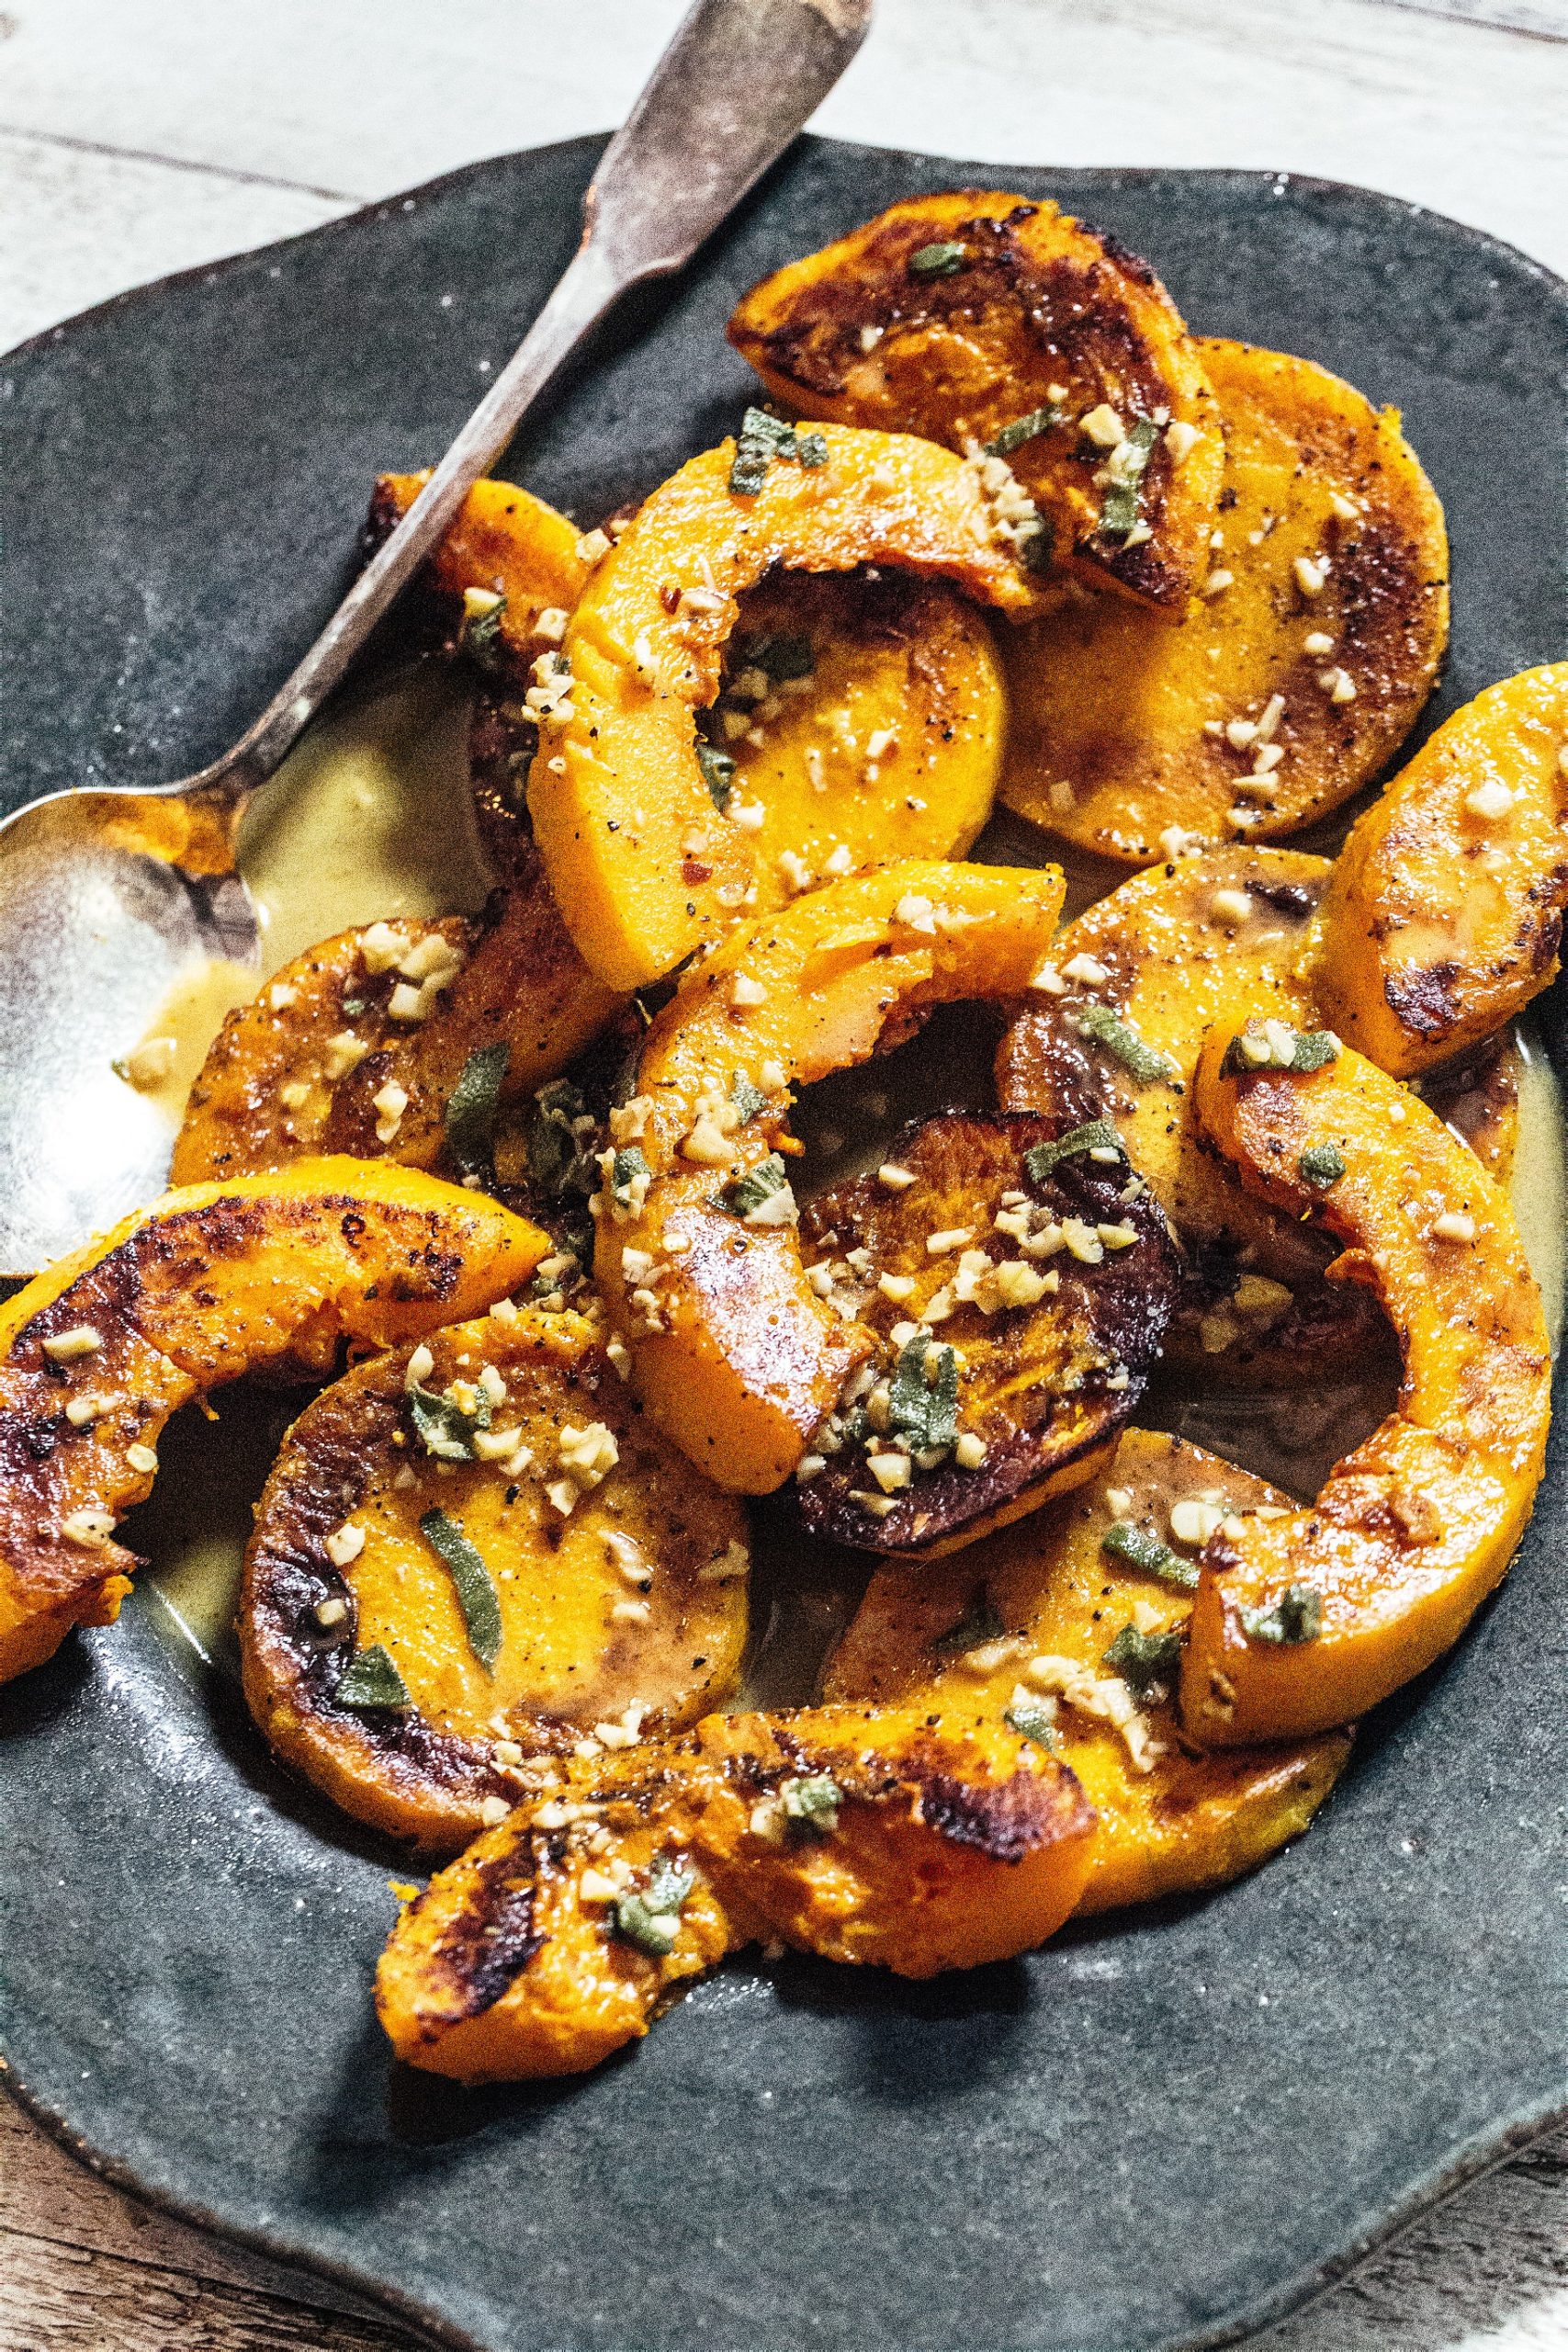 Garlicky Butternut Squash with Orange and Chili (plus 4 amazing uses for the sauce)